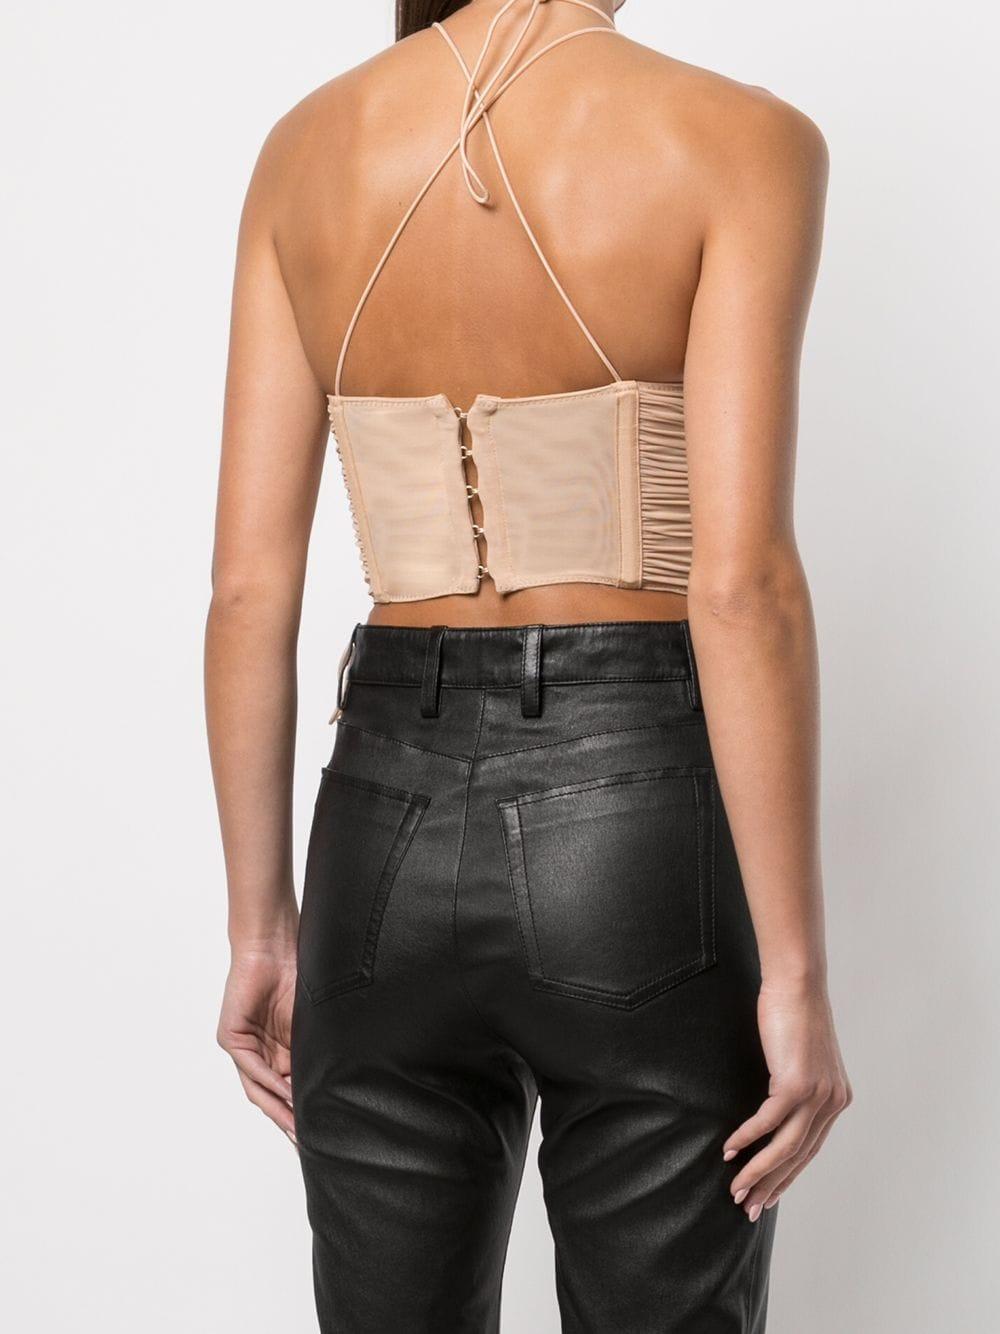 Dion Lee Powertulle Corset Top | Lyst